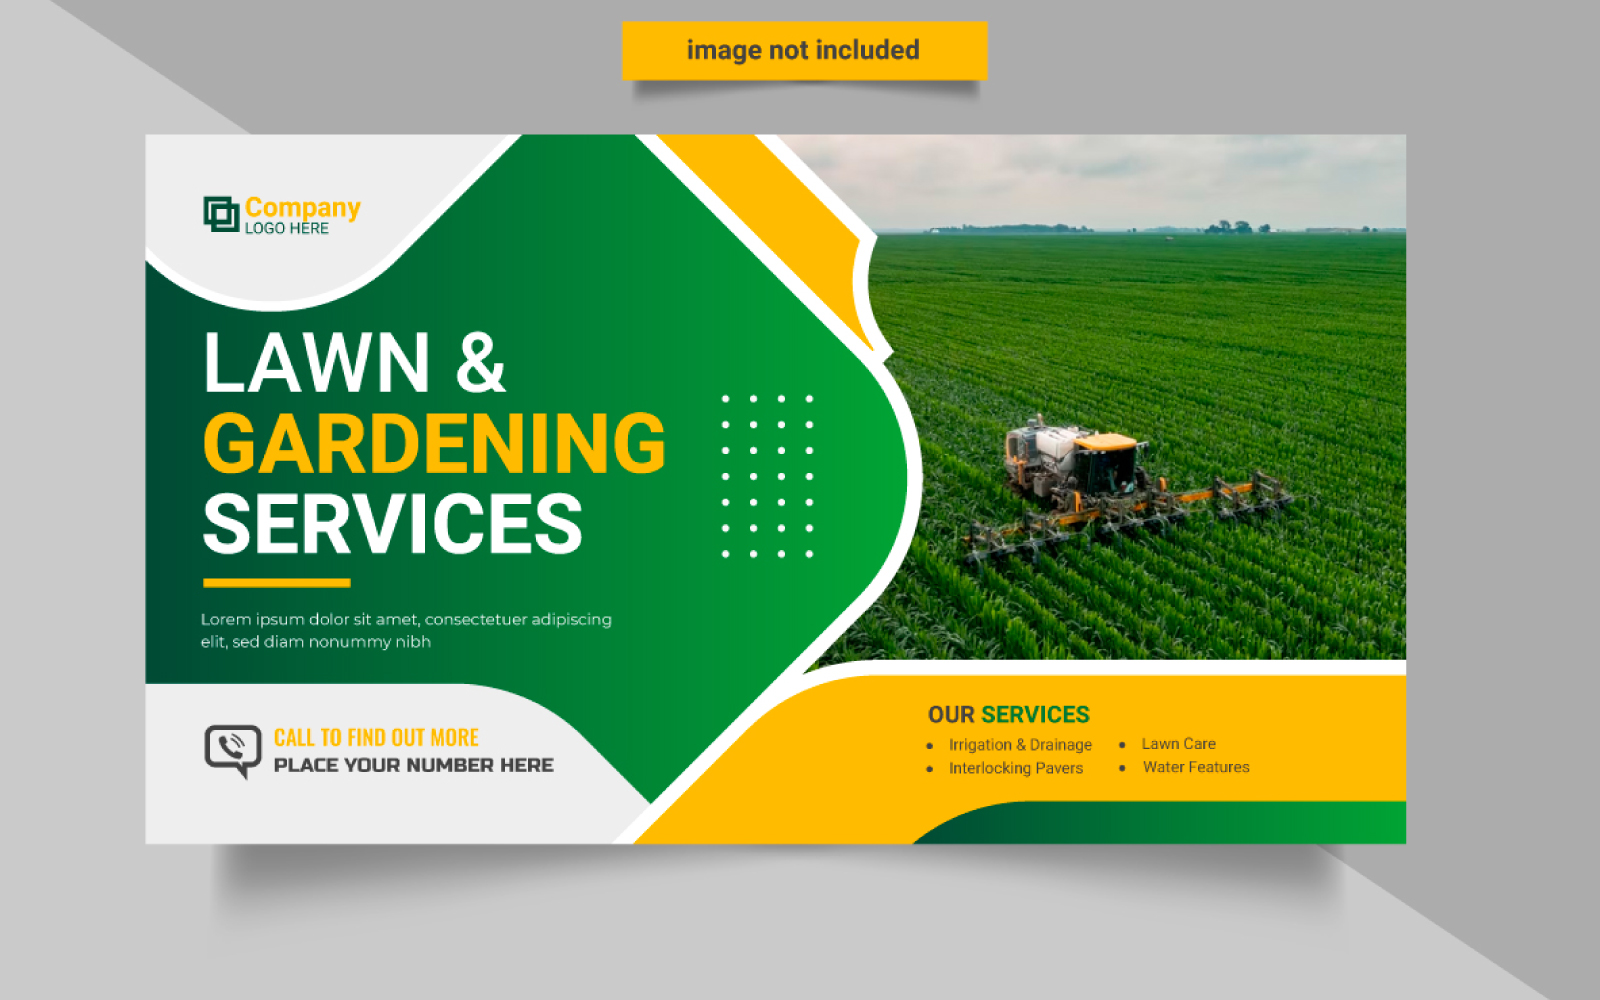 Agro farm and landscaping business web banner design  idea